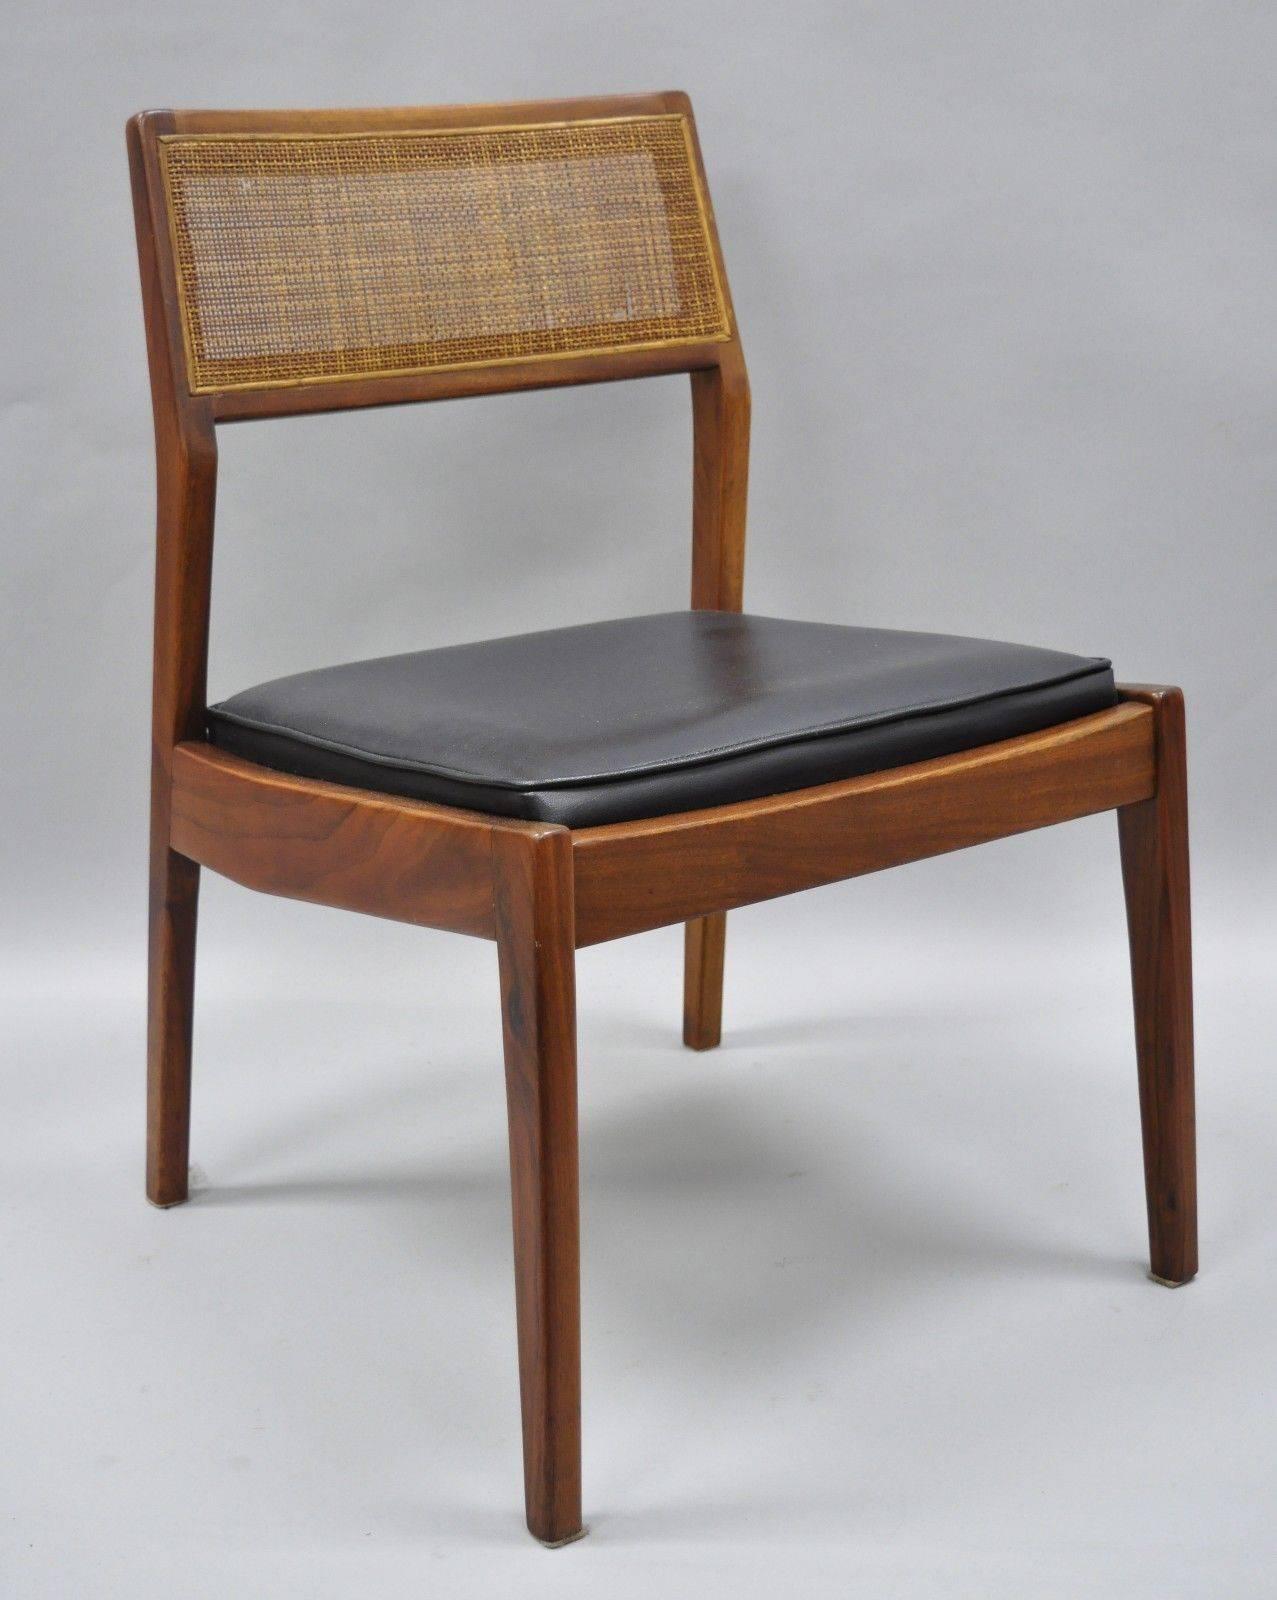 Set of six Jens Risom walnut and cane back dining chairs. Set includes five side chairs, one armchair, black vinyl seats, cane backs, solid wood construction, beautiful wood grain, sleek sculptural form, mid-20th century. 
Measurements: 
Armchair